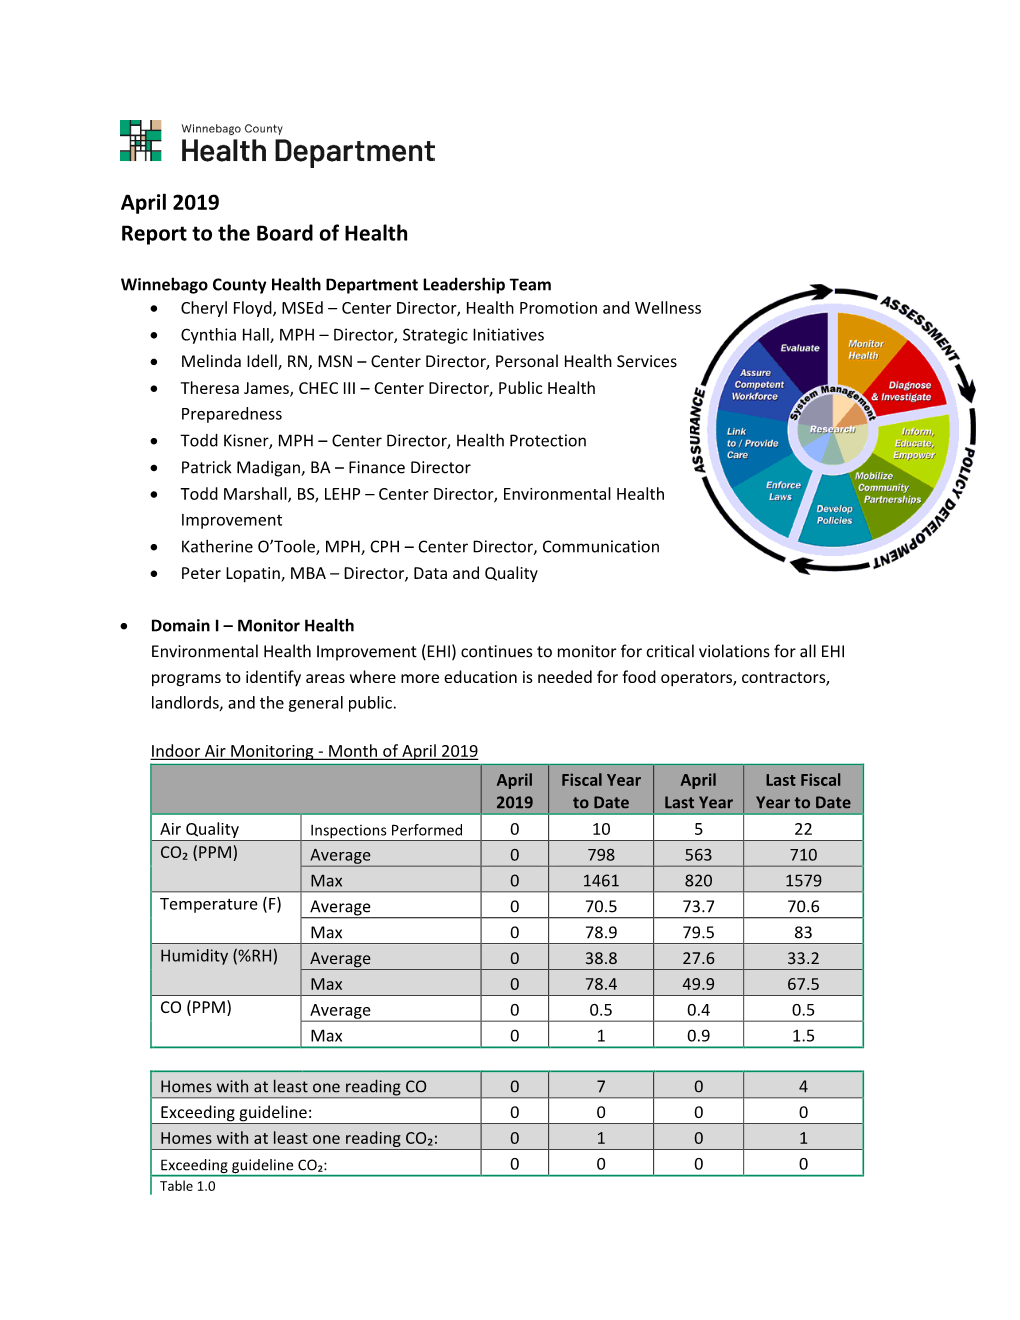 April 2019 Report to the Board of Health